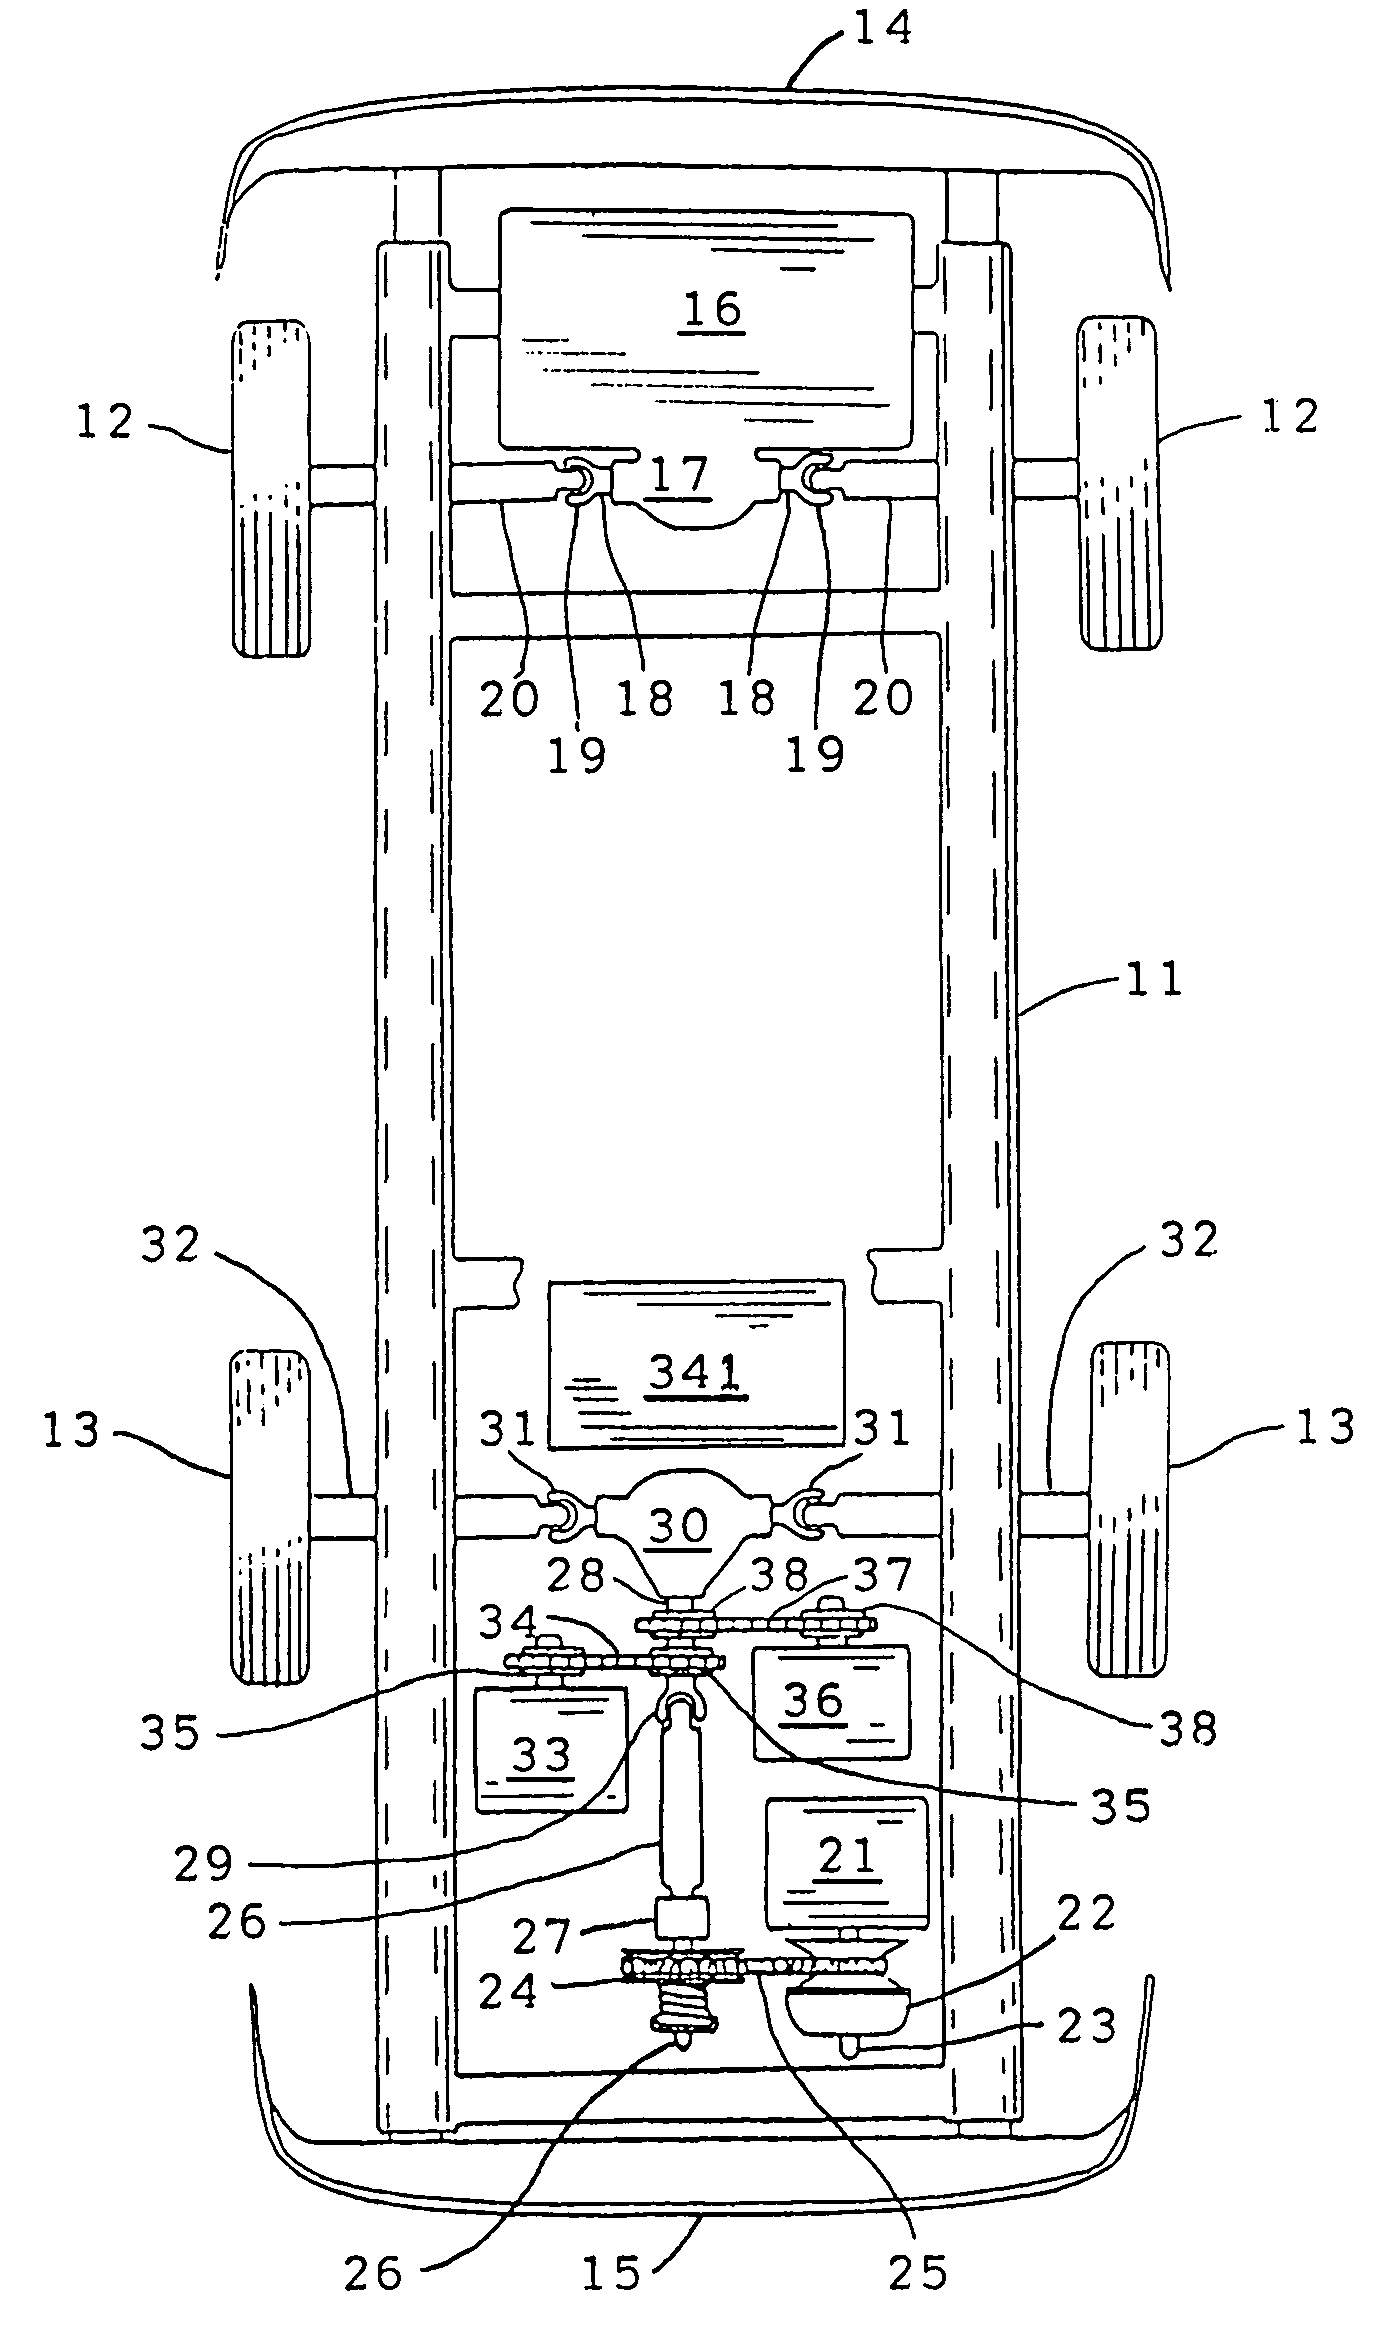 Motor vehicle with a primary engine for acceleration and secondary engine augmented by an electric motor for cruising